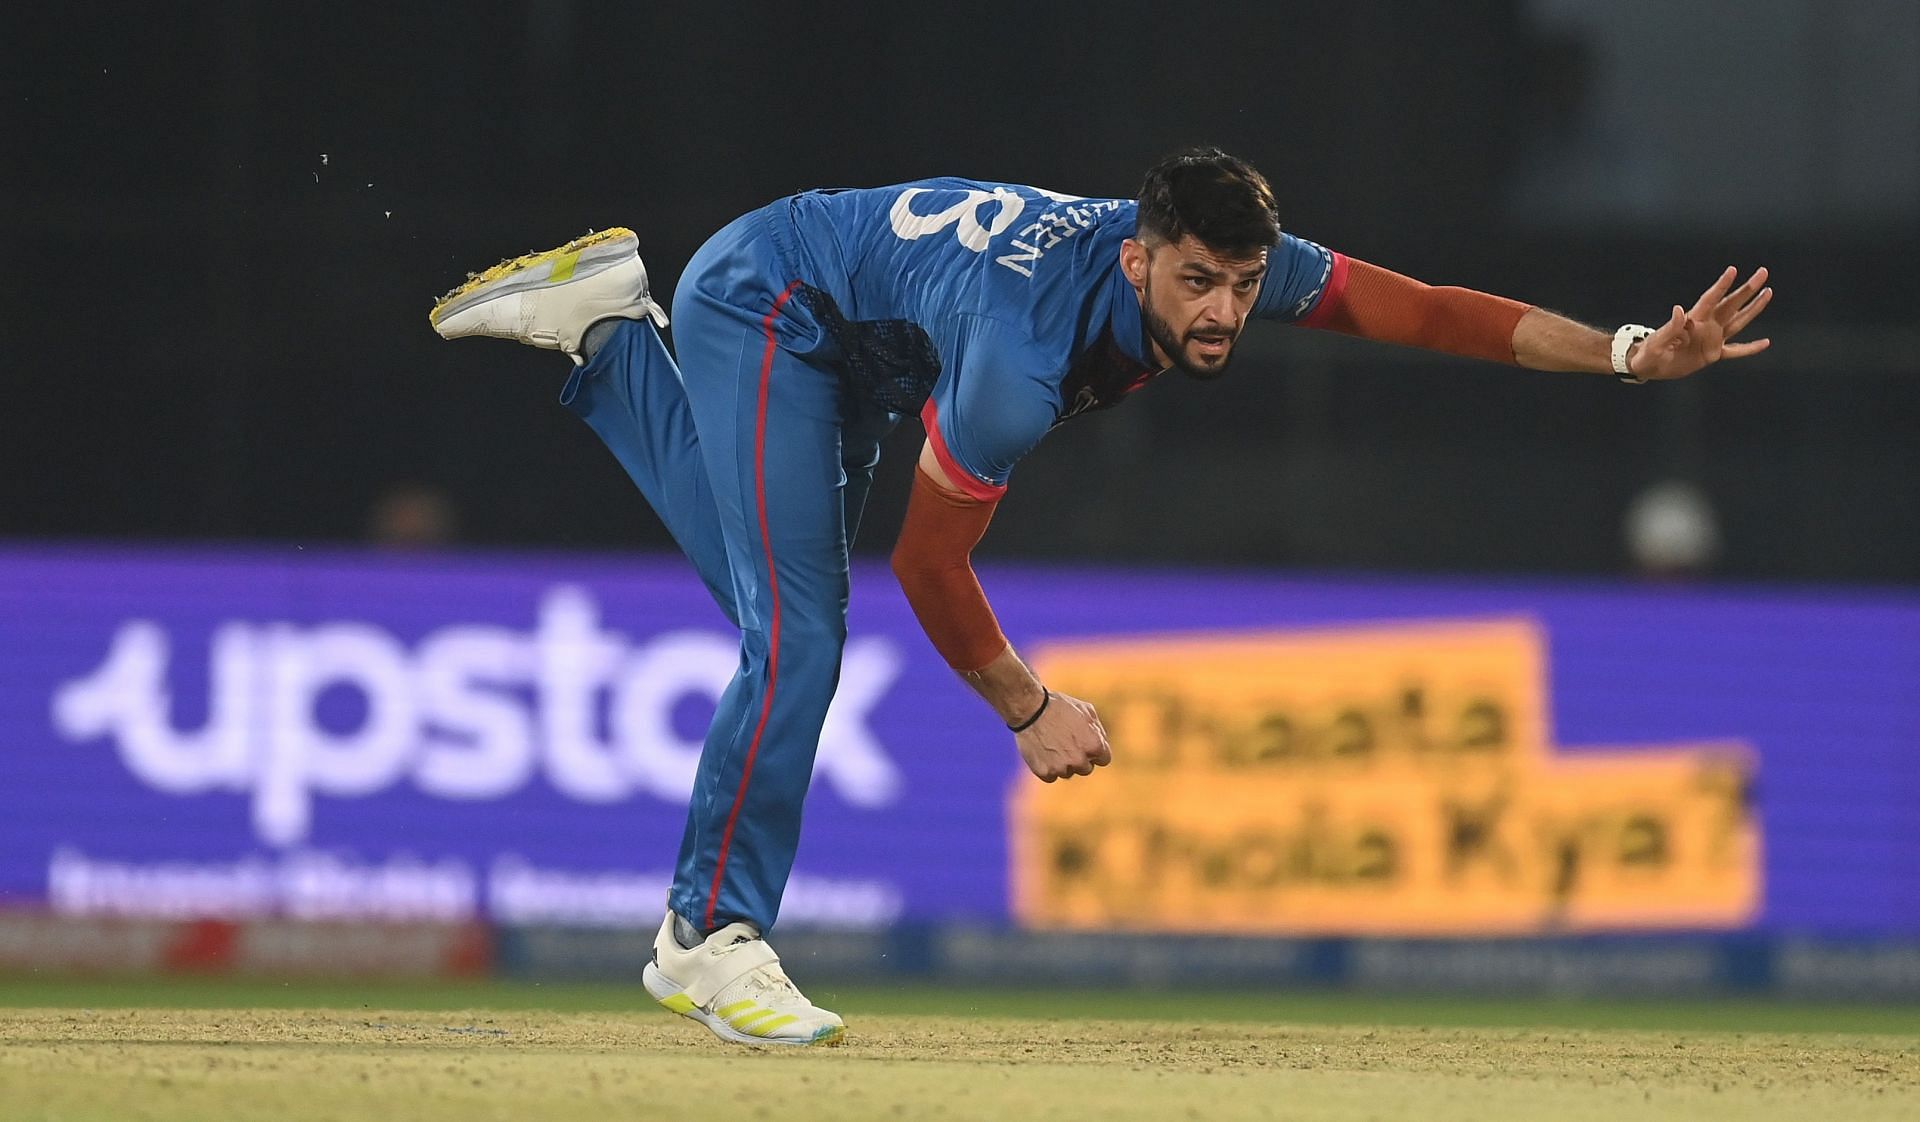 Naveen-ul-Haq has picked up 39 wickets in 30 T20Is. [P/C: Getty]